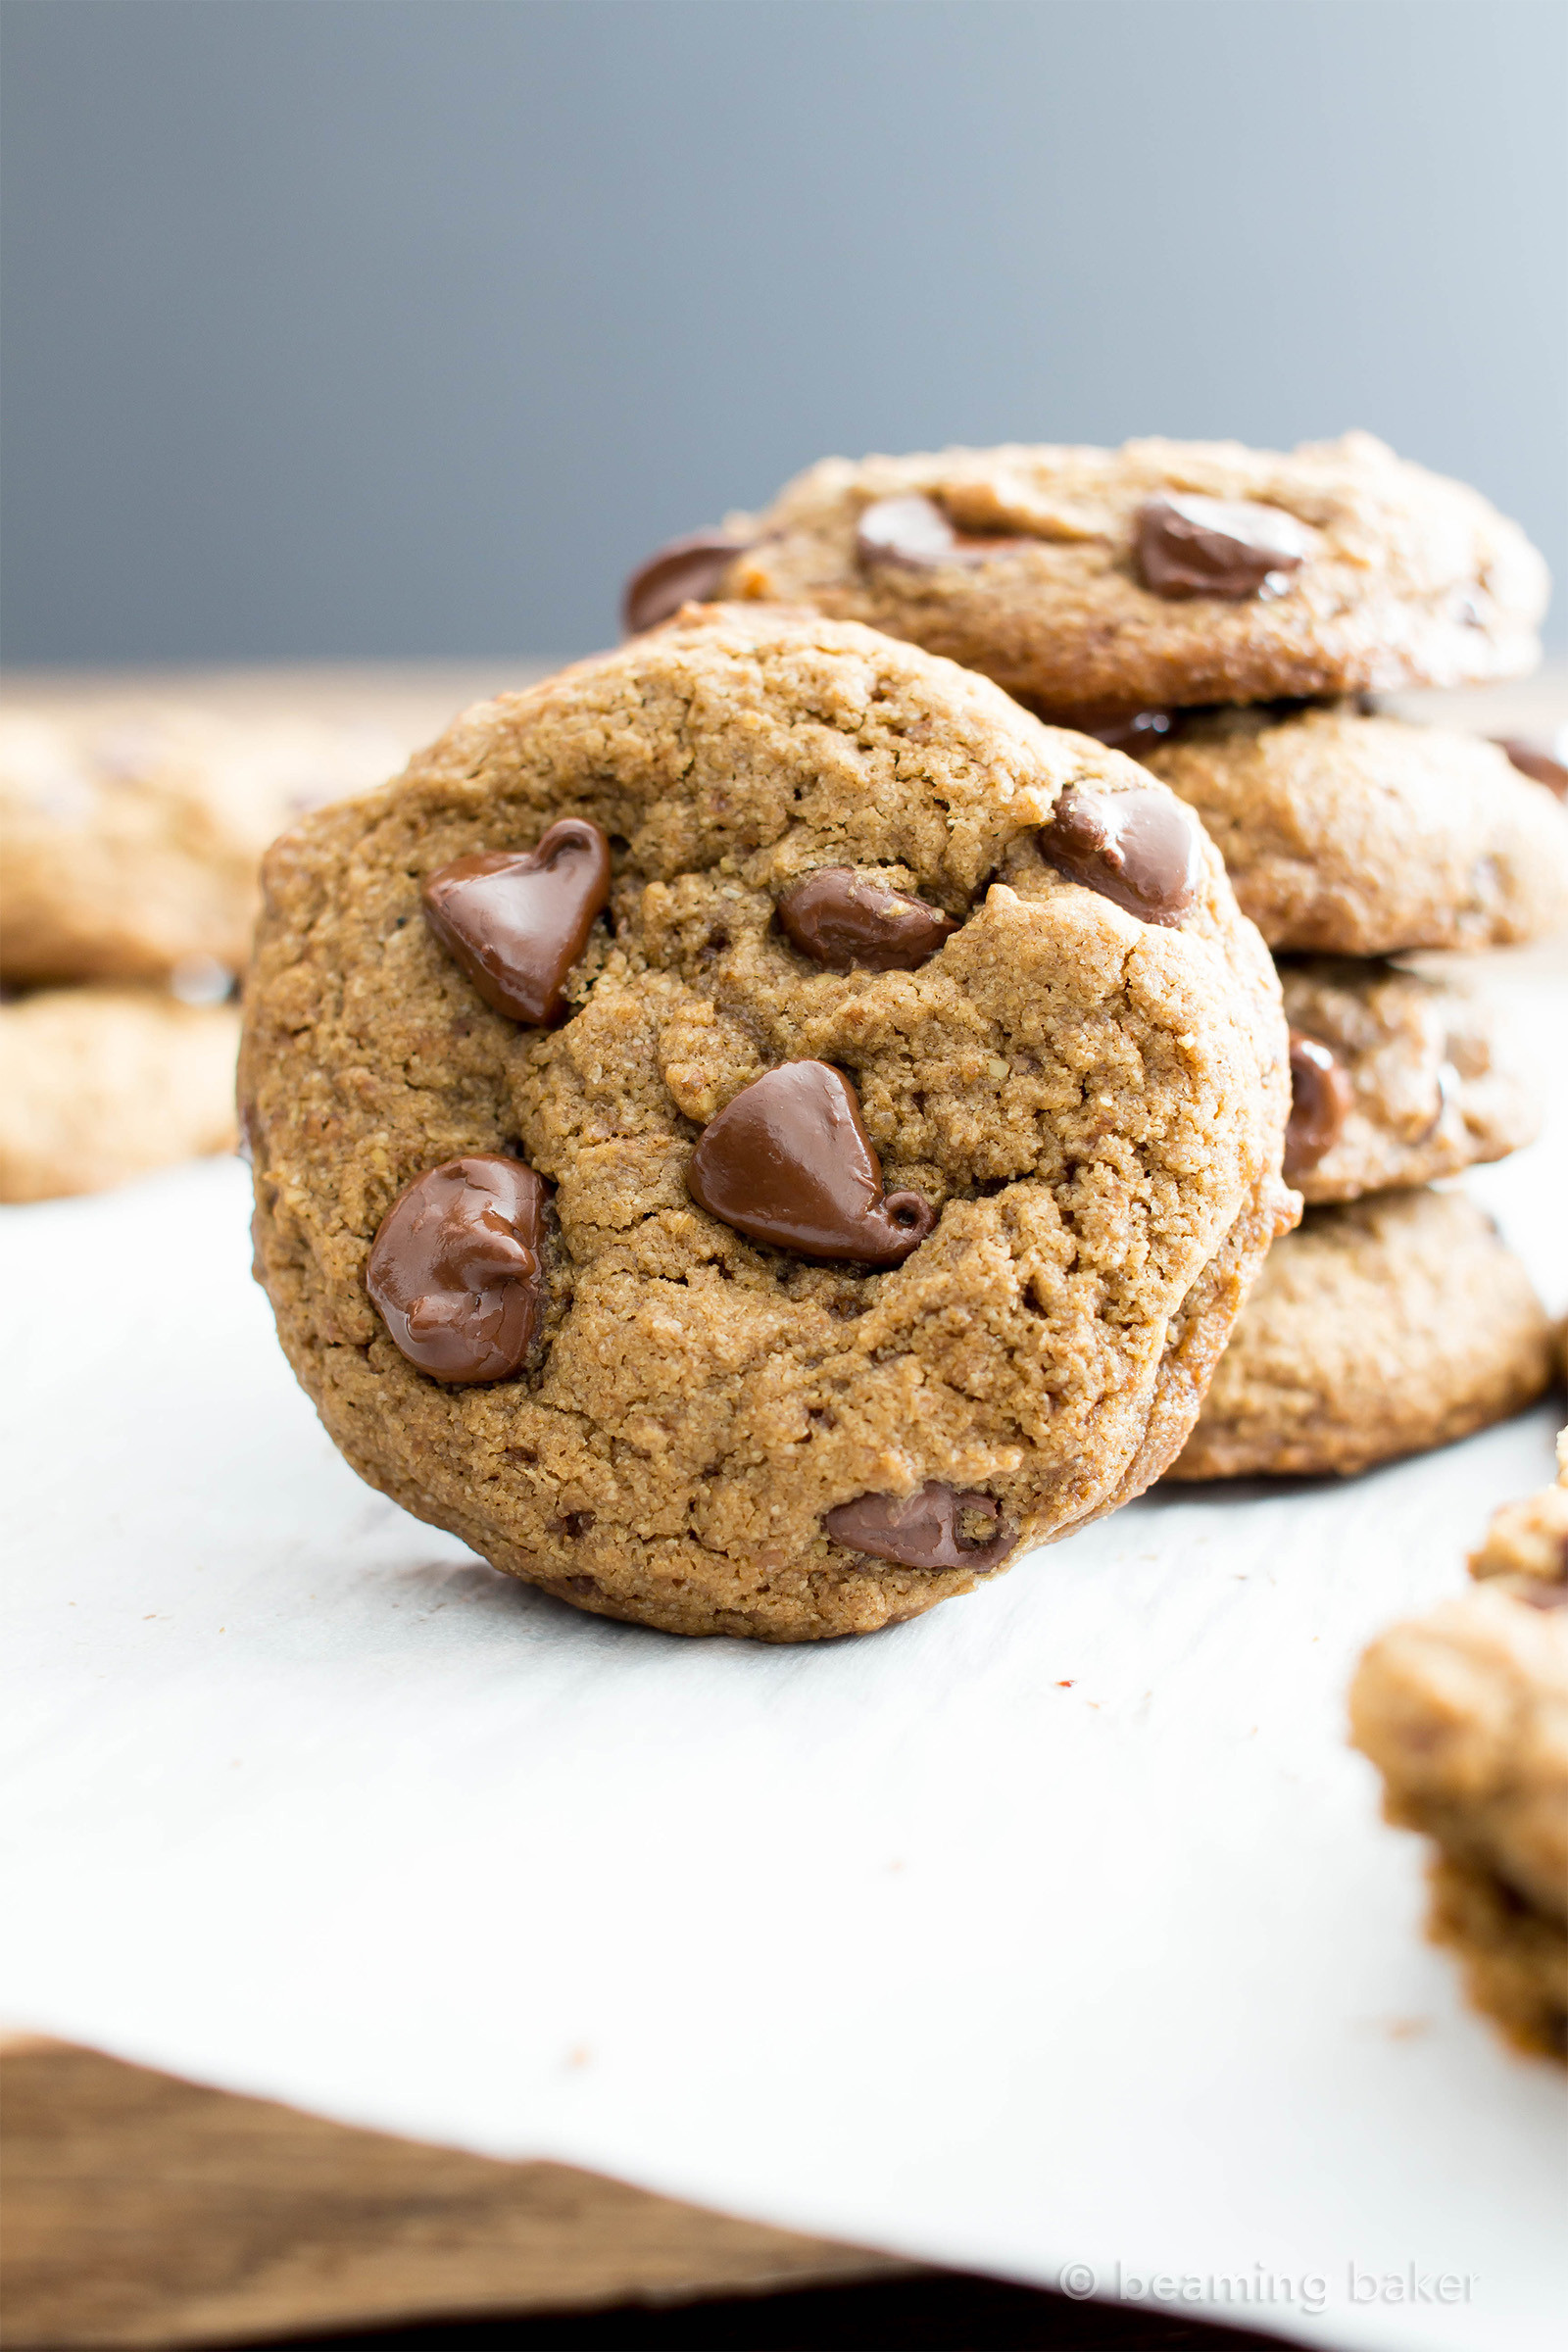 Gluten And Dairy Free Chocolate Chip Cookies Vegan Chocolate Chip Cookies Recipe Gluten Free Dairy